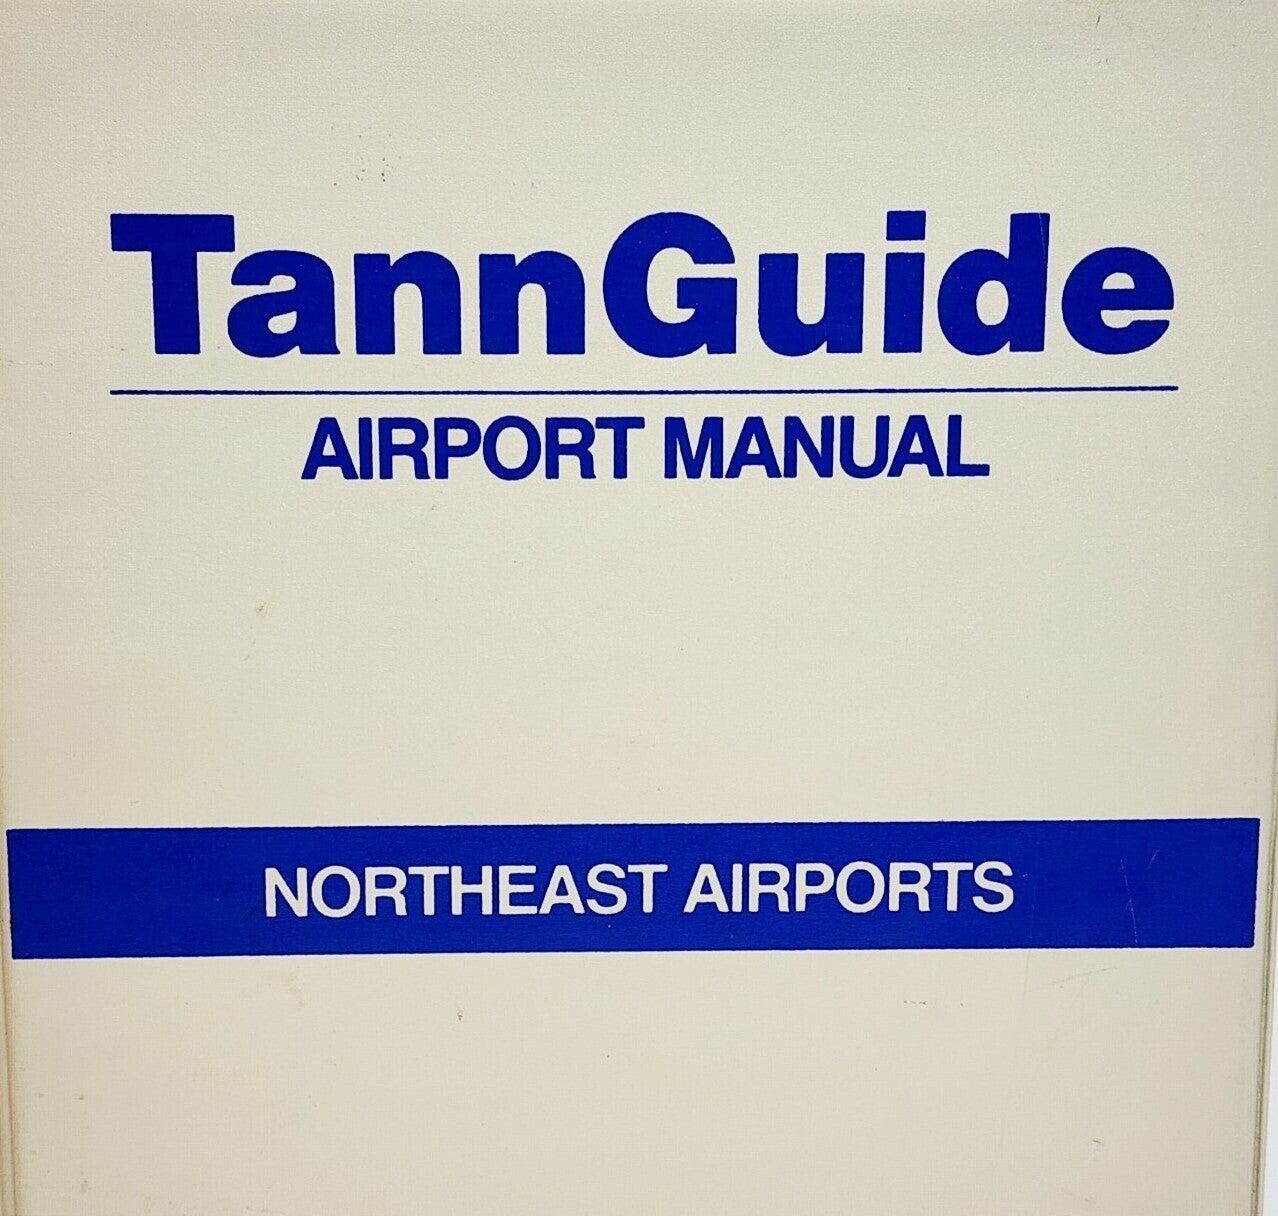 Primary image for 1989 TannGuide Airport Manual Northeast Vintage Transportation Aviation Binder